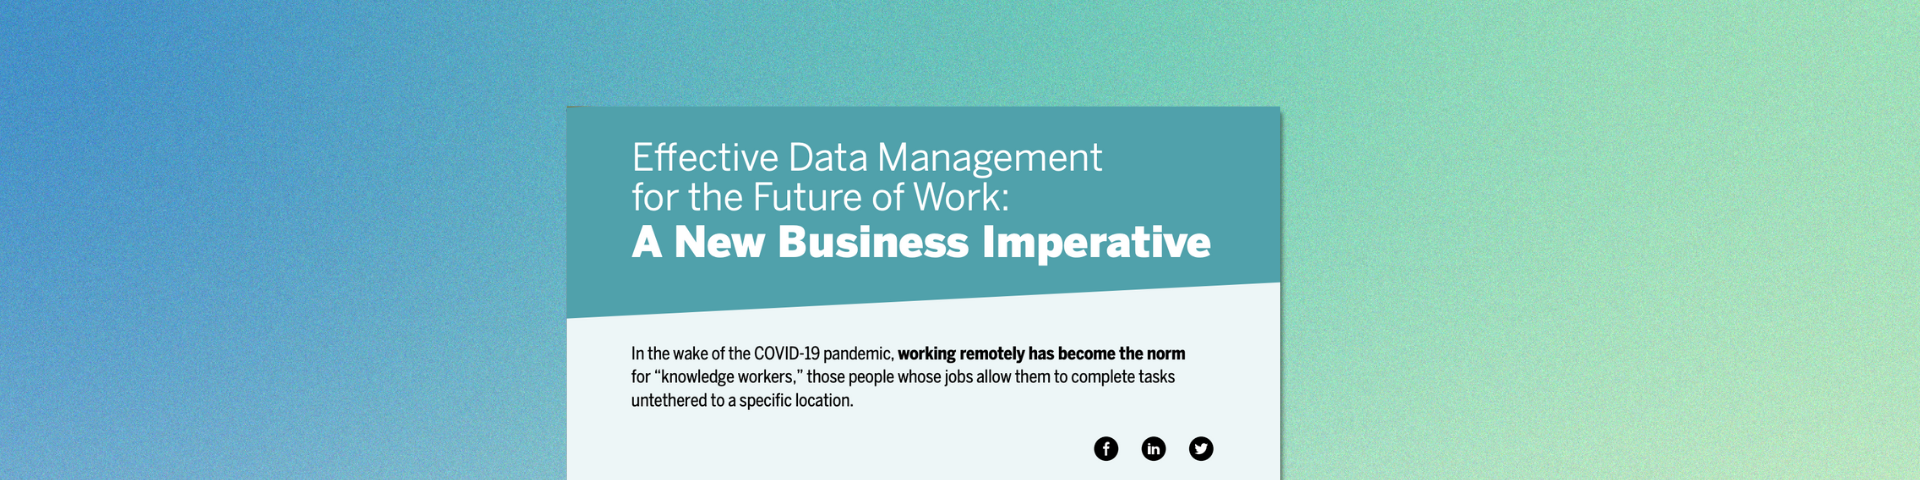 Effective Data Management for the Future of Work eBook - Ripcord